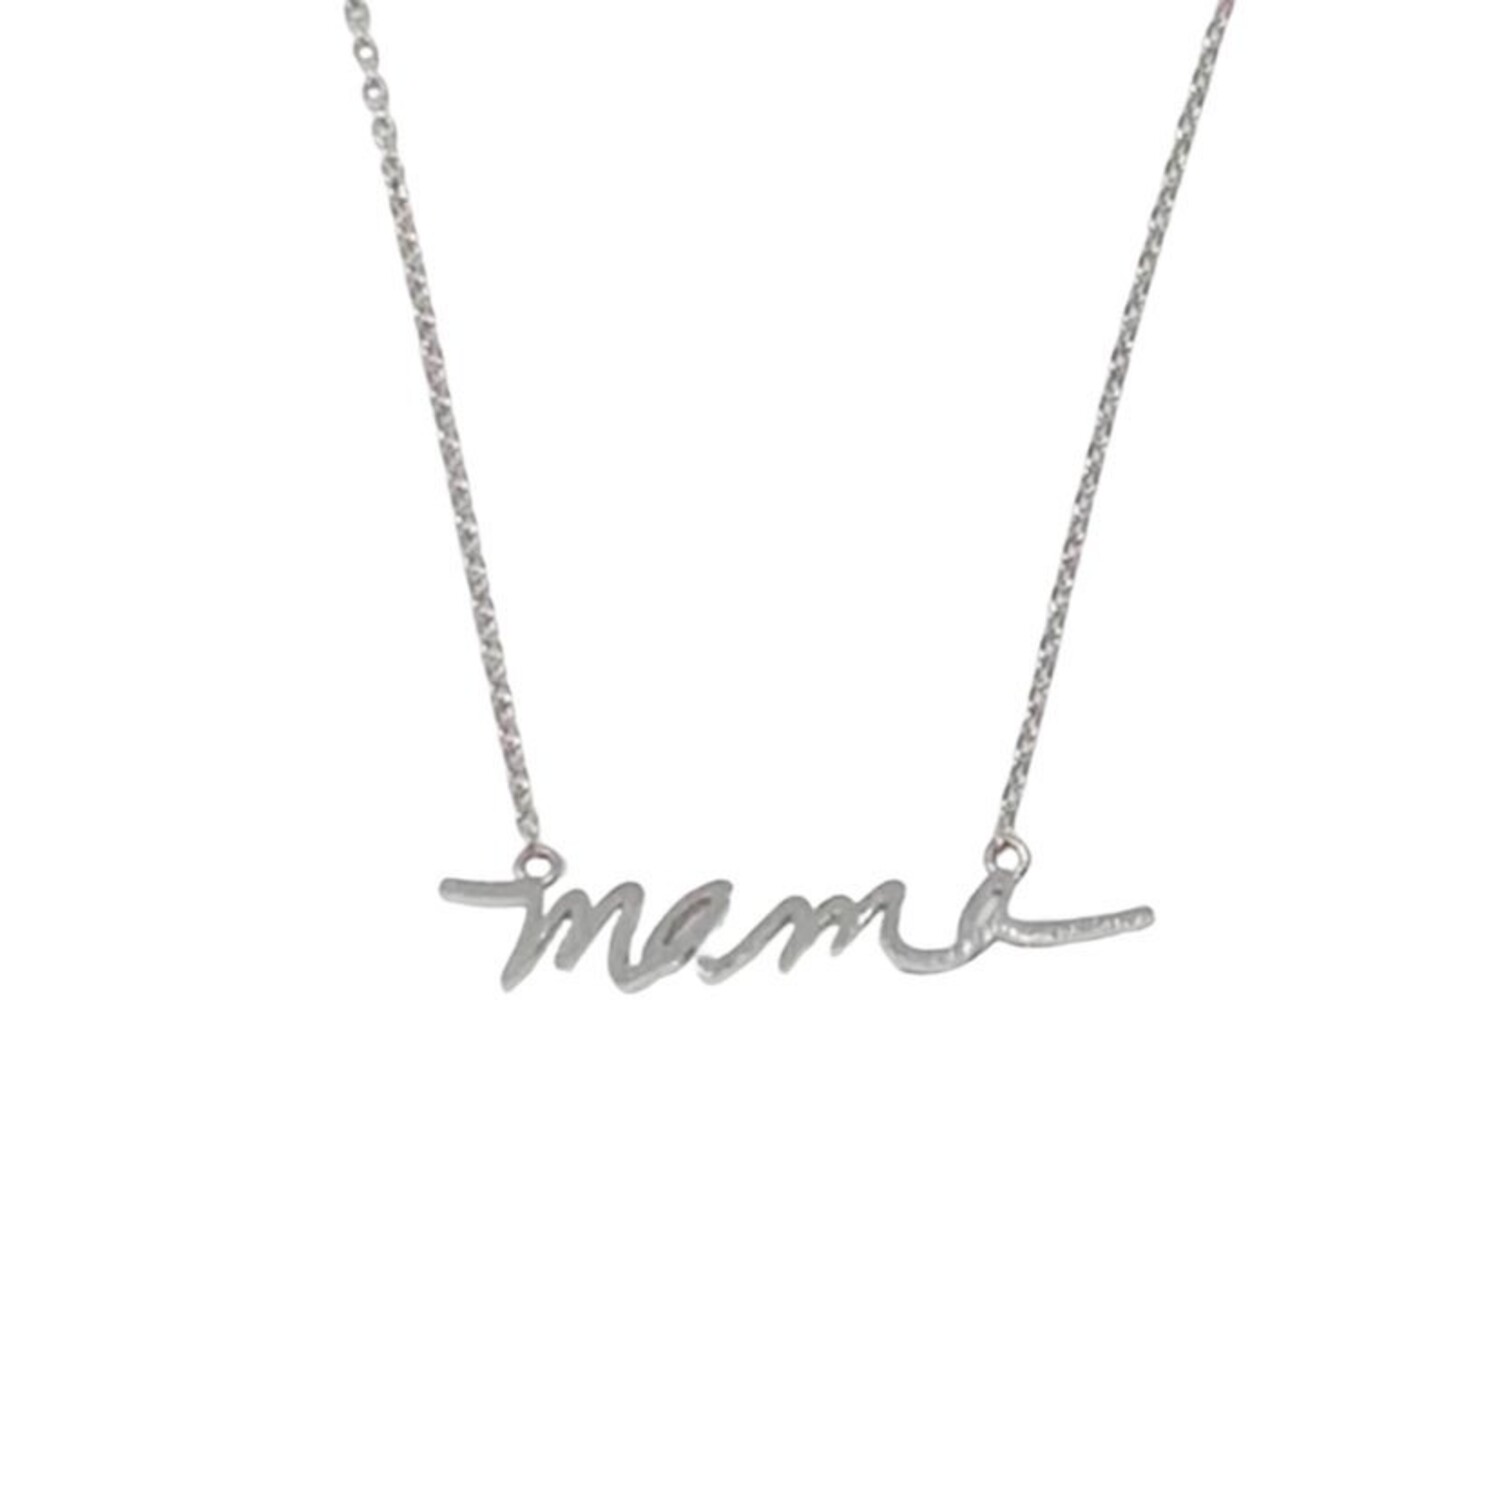 Ornate Jewels Pure Sterling Silver Chain Mama Pendant Necklace Best Gift  For Mother's Day |With Certificate of Authenticity & 925 Stamp|1 Year  Warranty : Amazon.in: Fashion